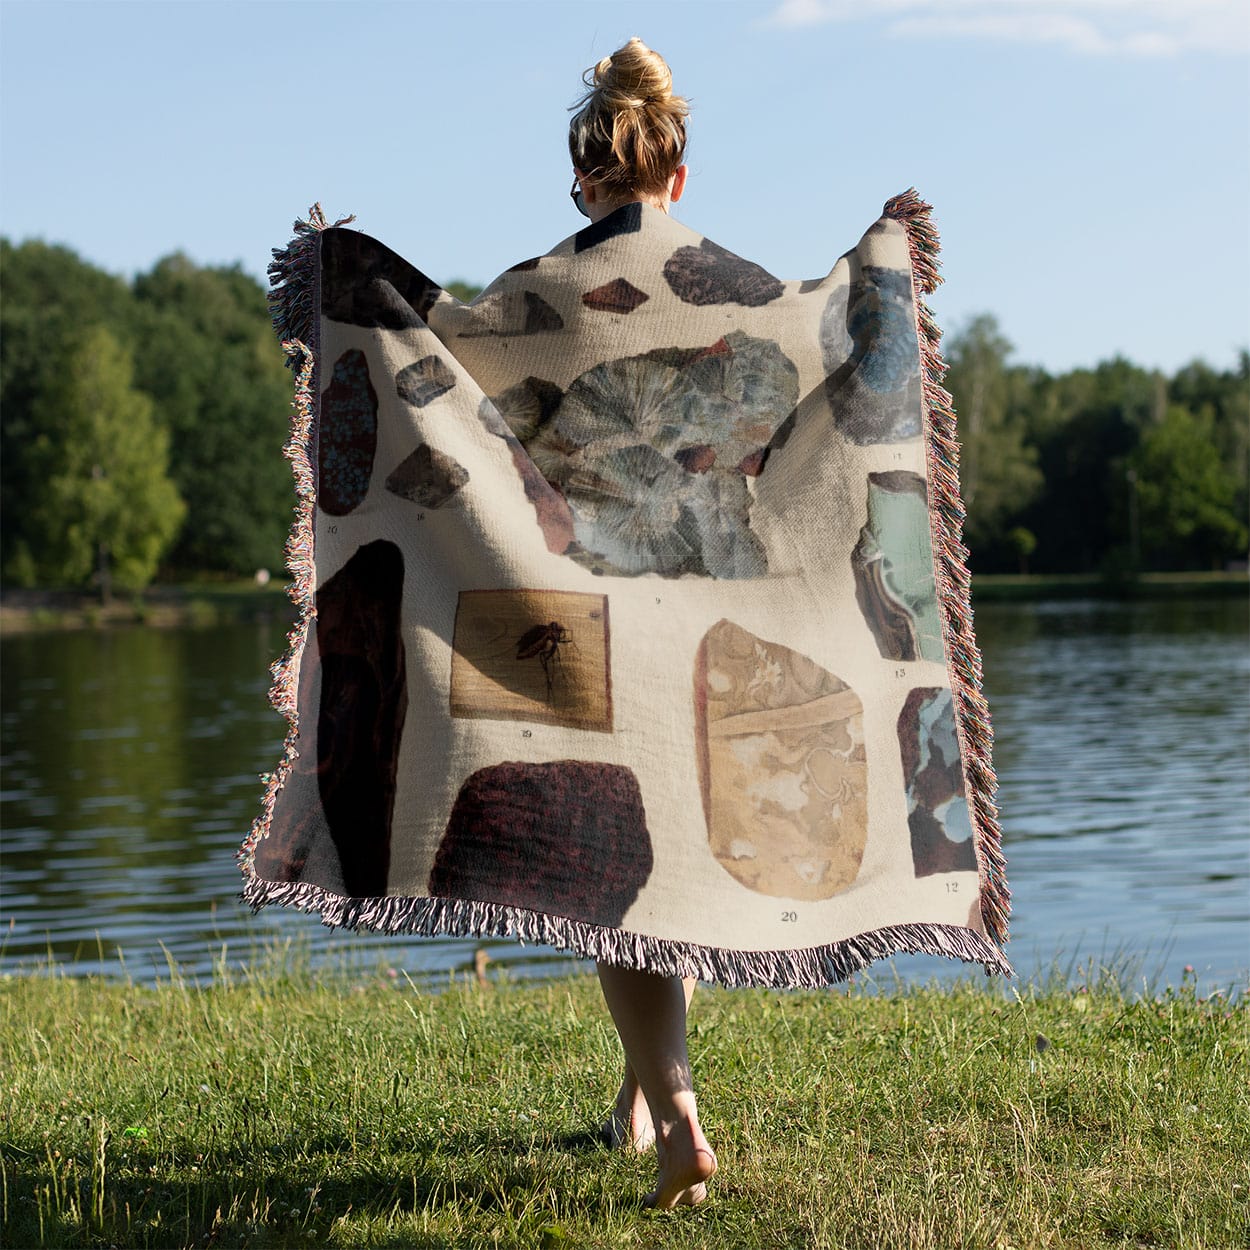 Unique Gemstone Woven Blanket Held on a Woman's Back Outside